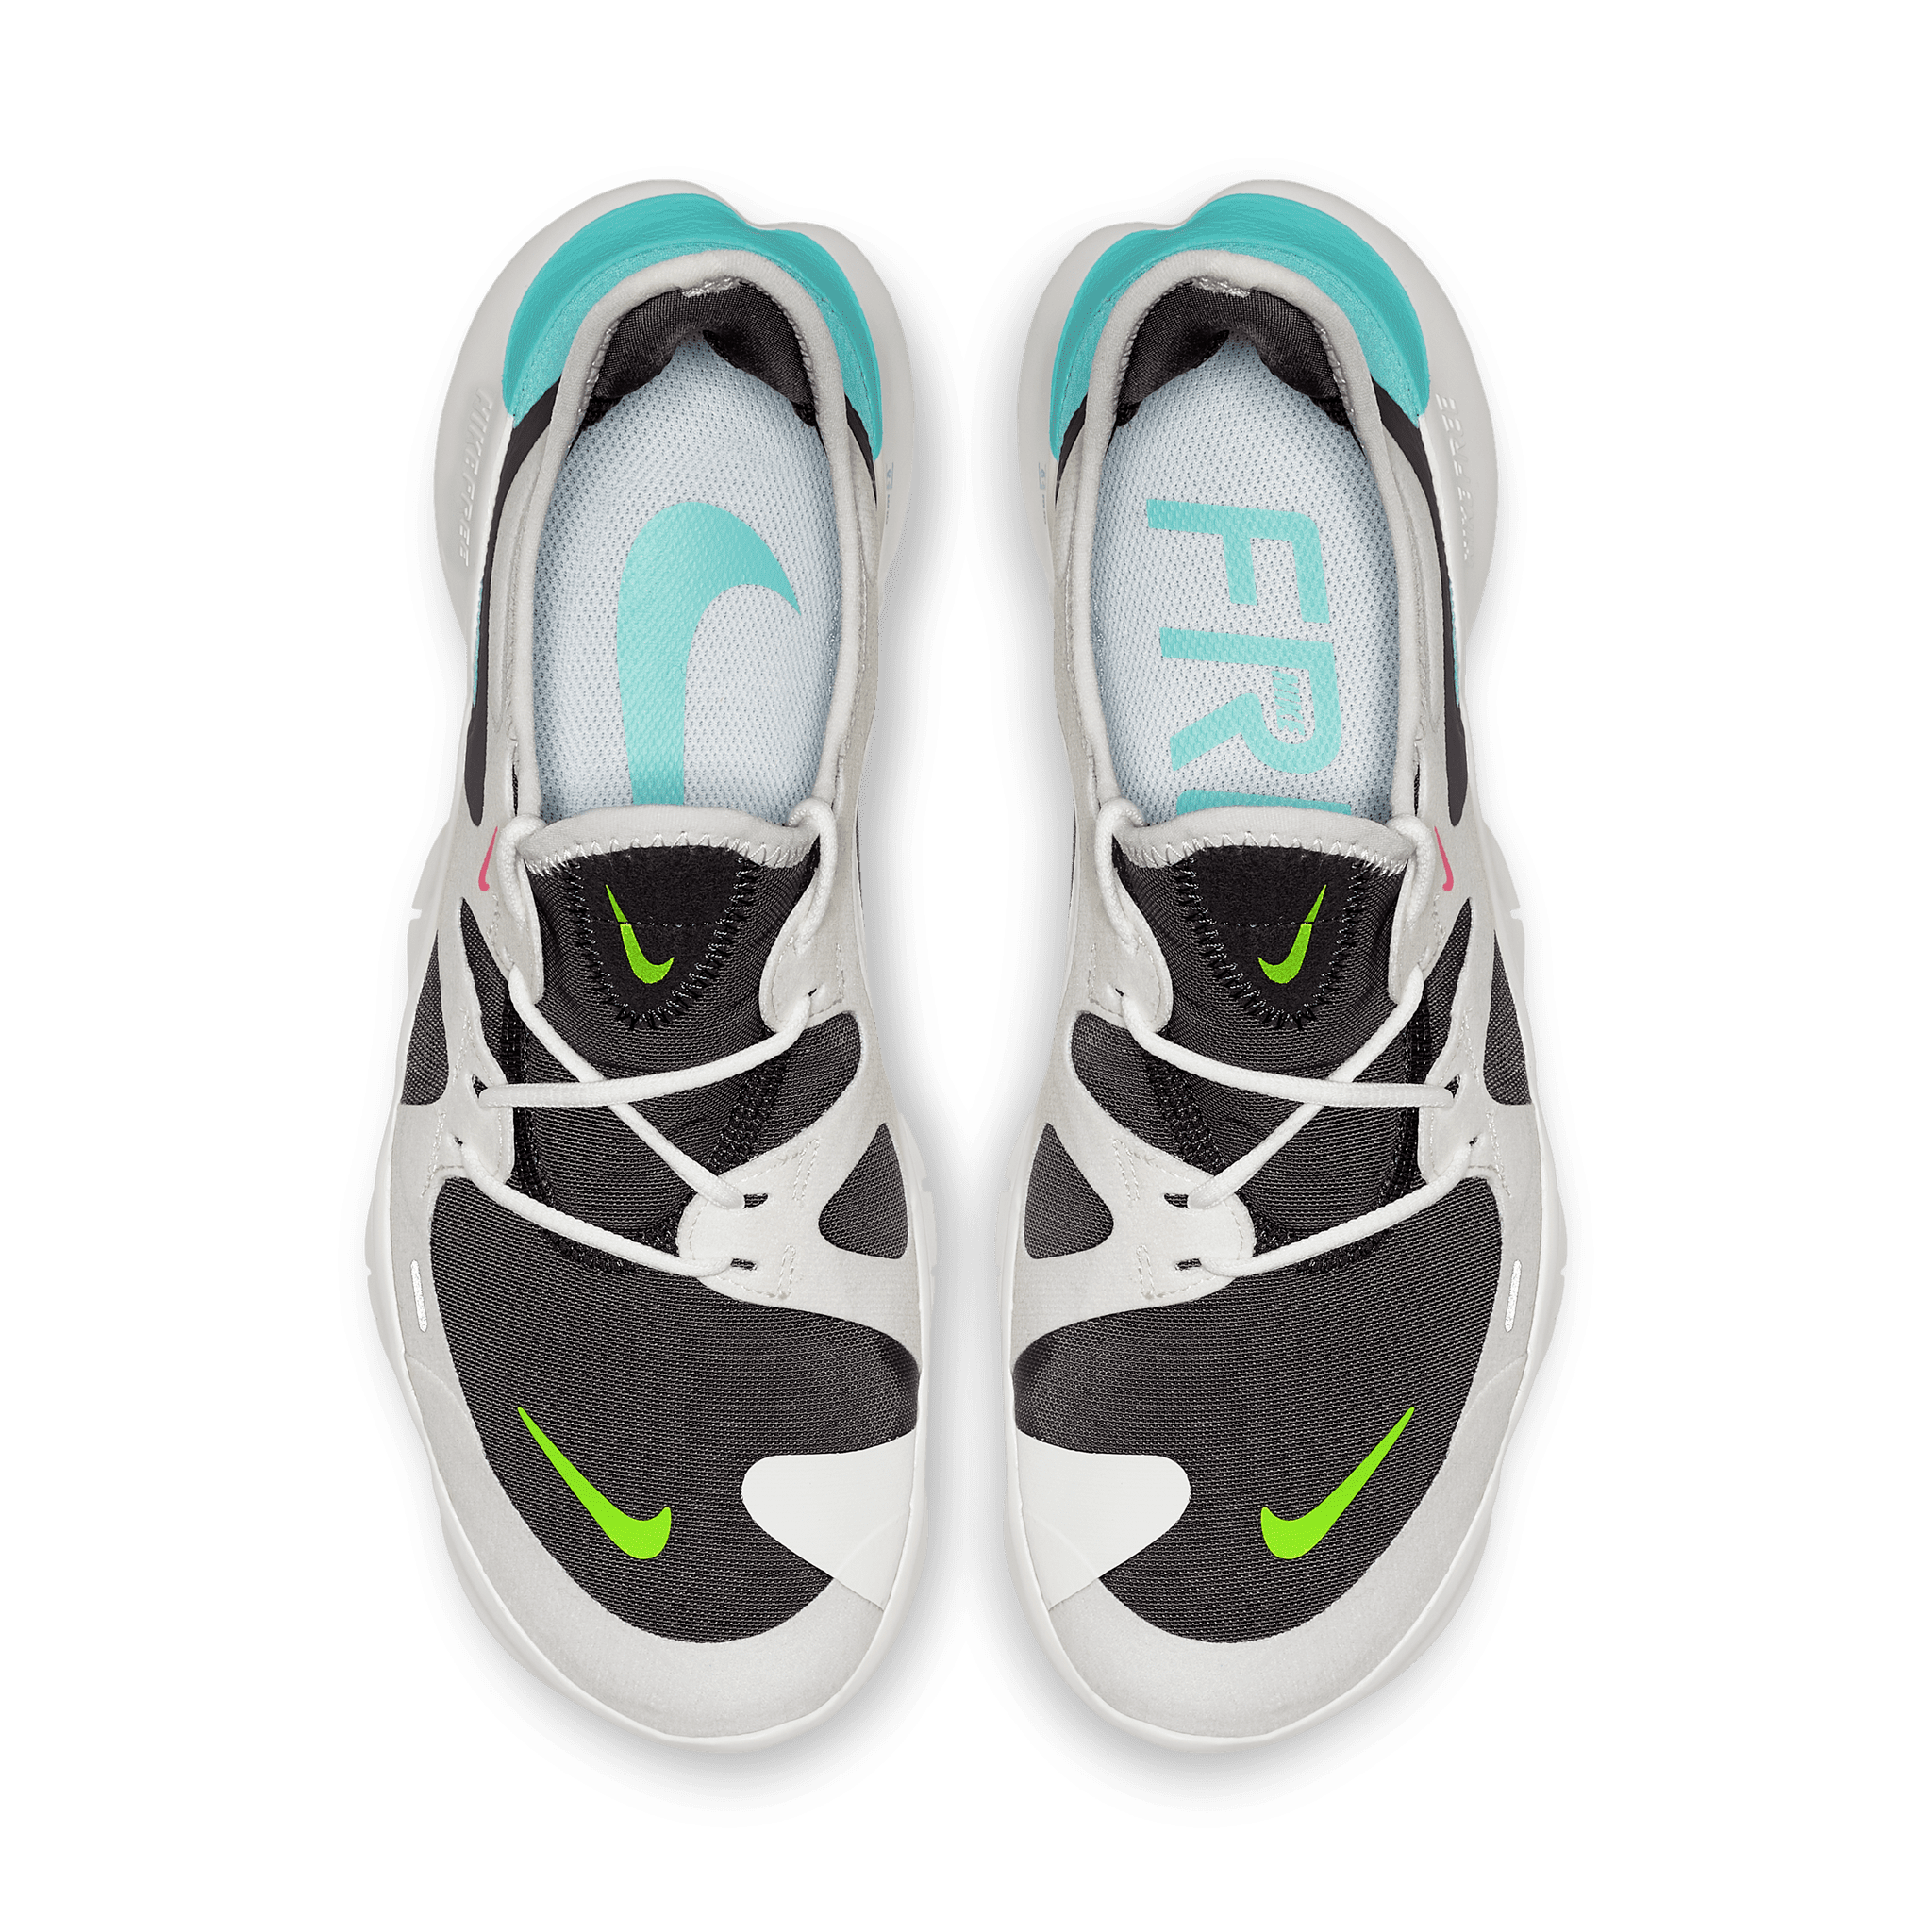 Nike Free Running Shoes 2019 | vlr.eng.br